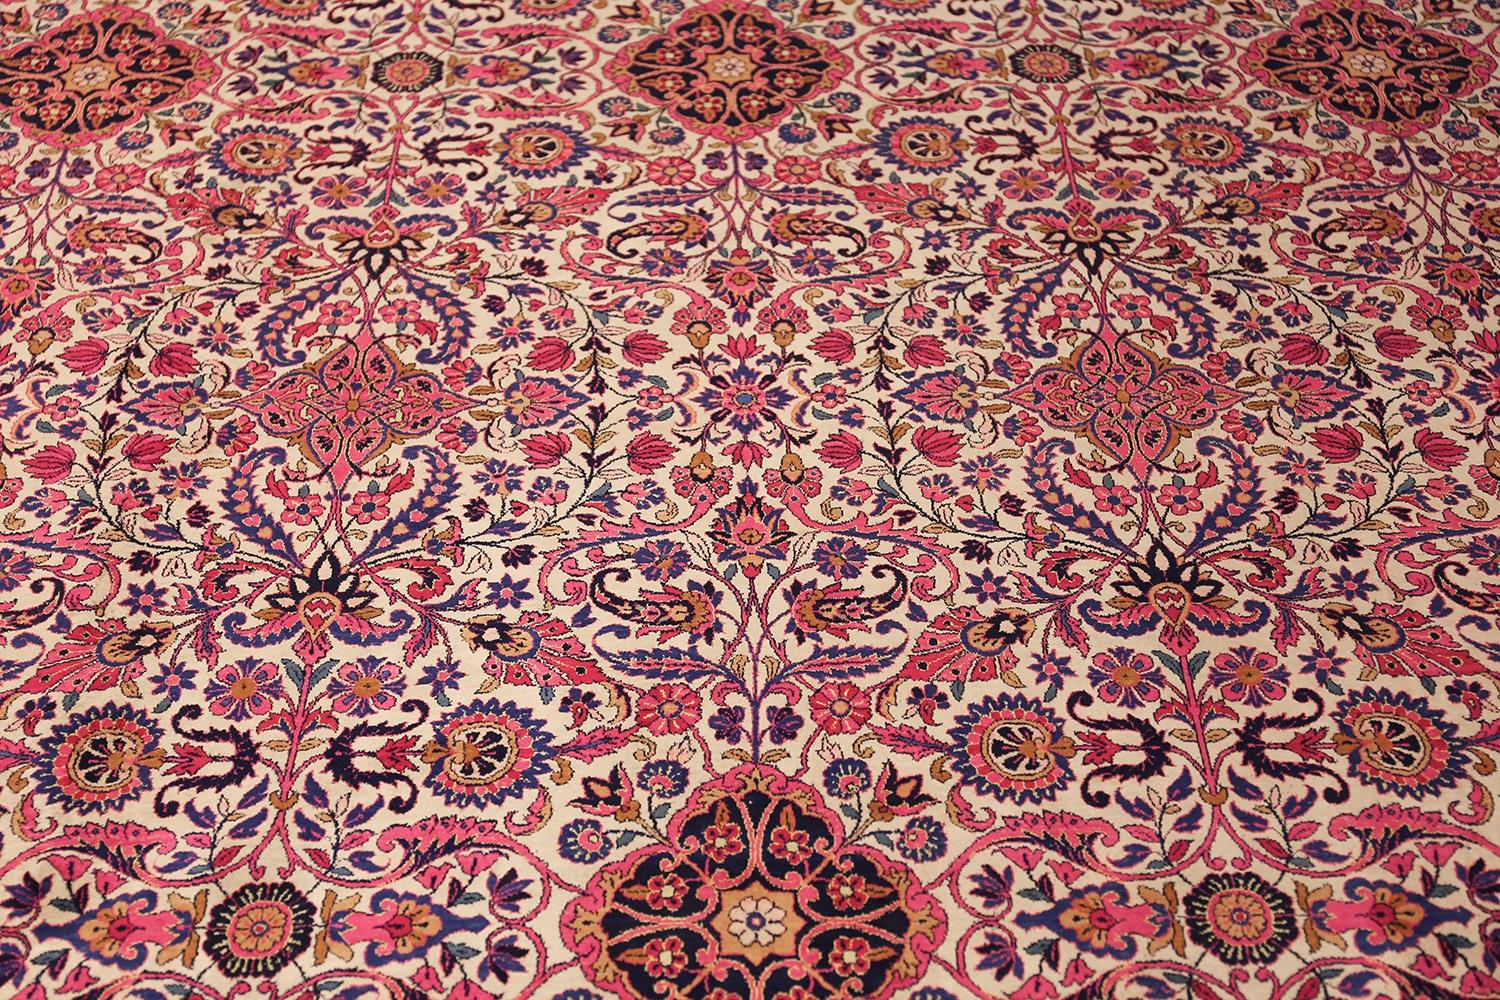 Antique Silk Kashan Persian Area Rug, Country of origin: Persia, Circa date: 1900. Size: 9 ft x 13 ft (2.74 m x 3.96 m)

